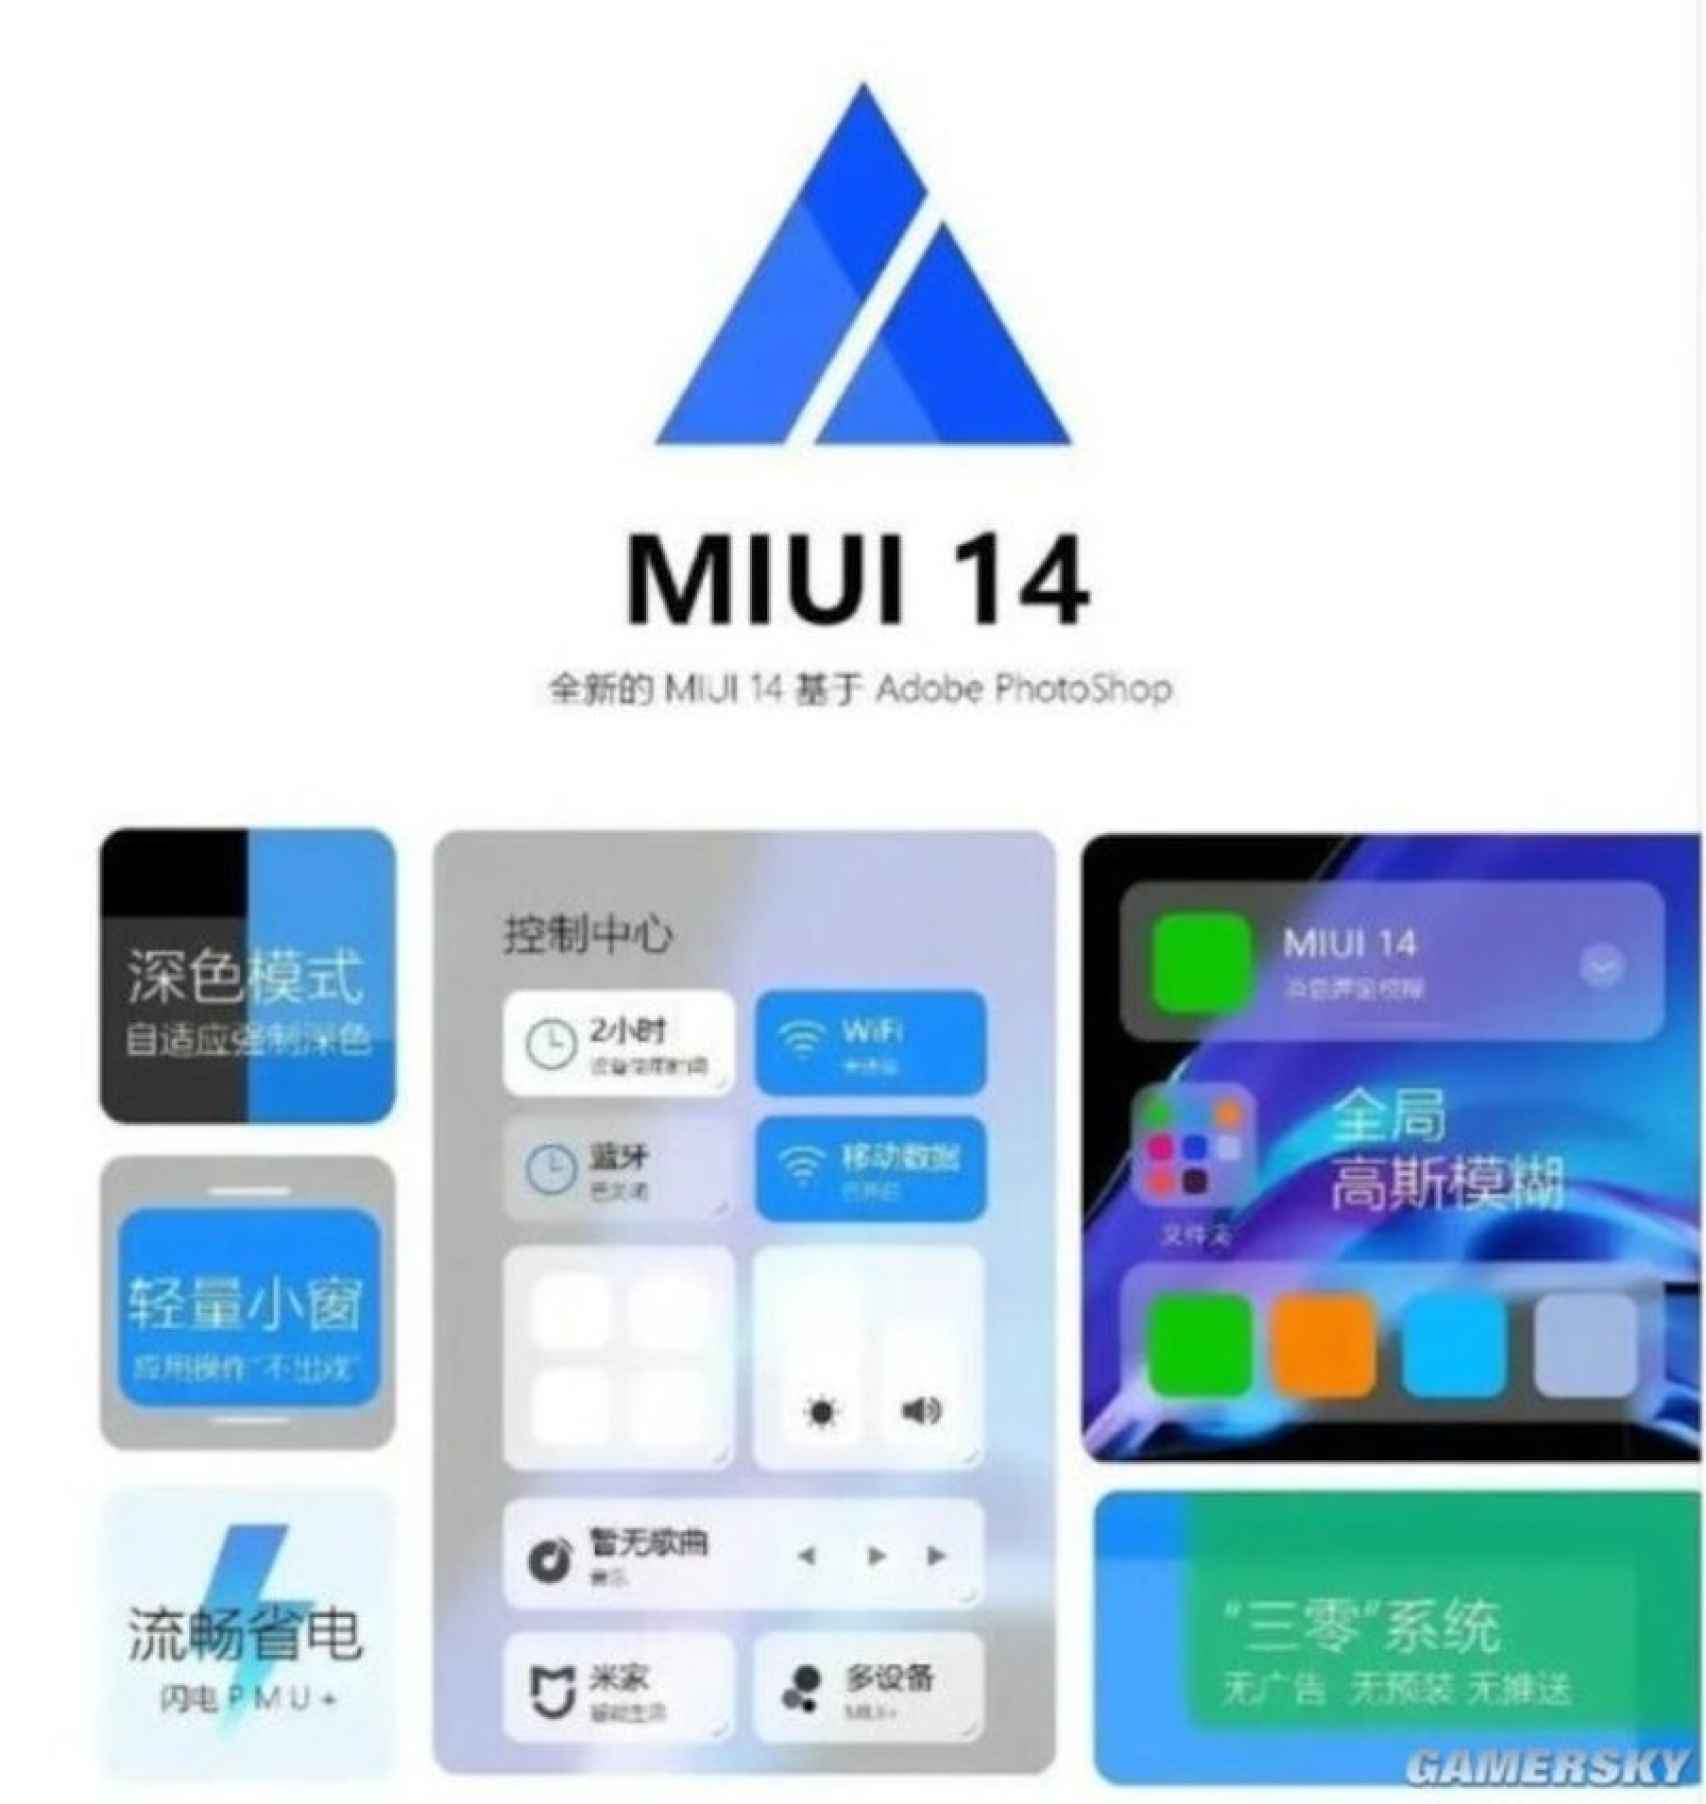 MUI 14 would be a lighter and simplified  system for Xiaomi mobiles